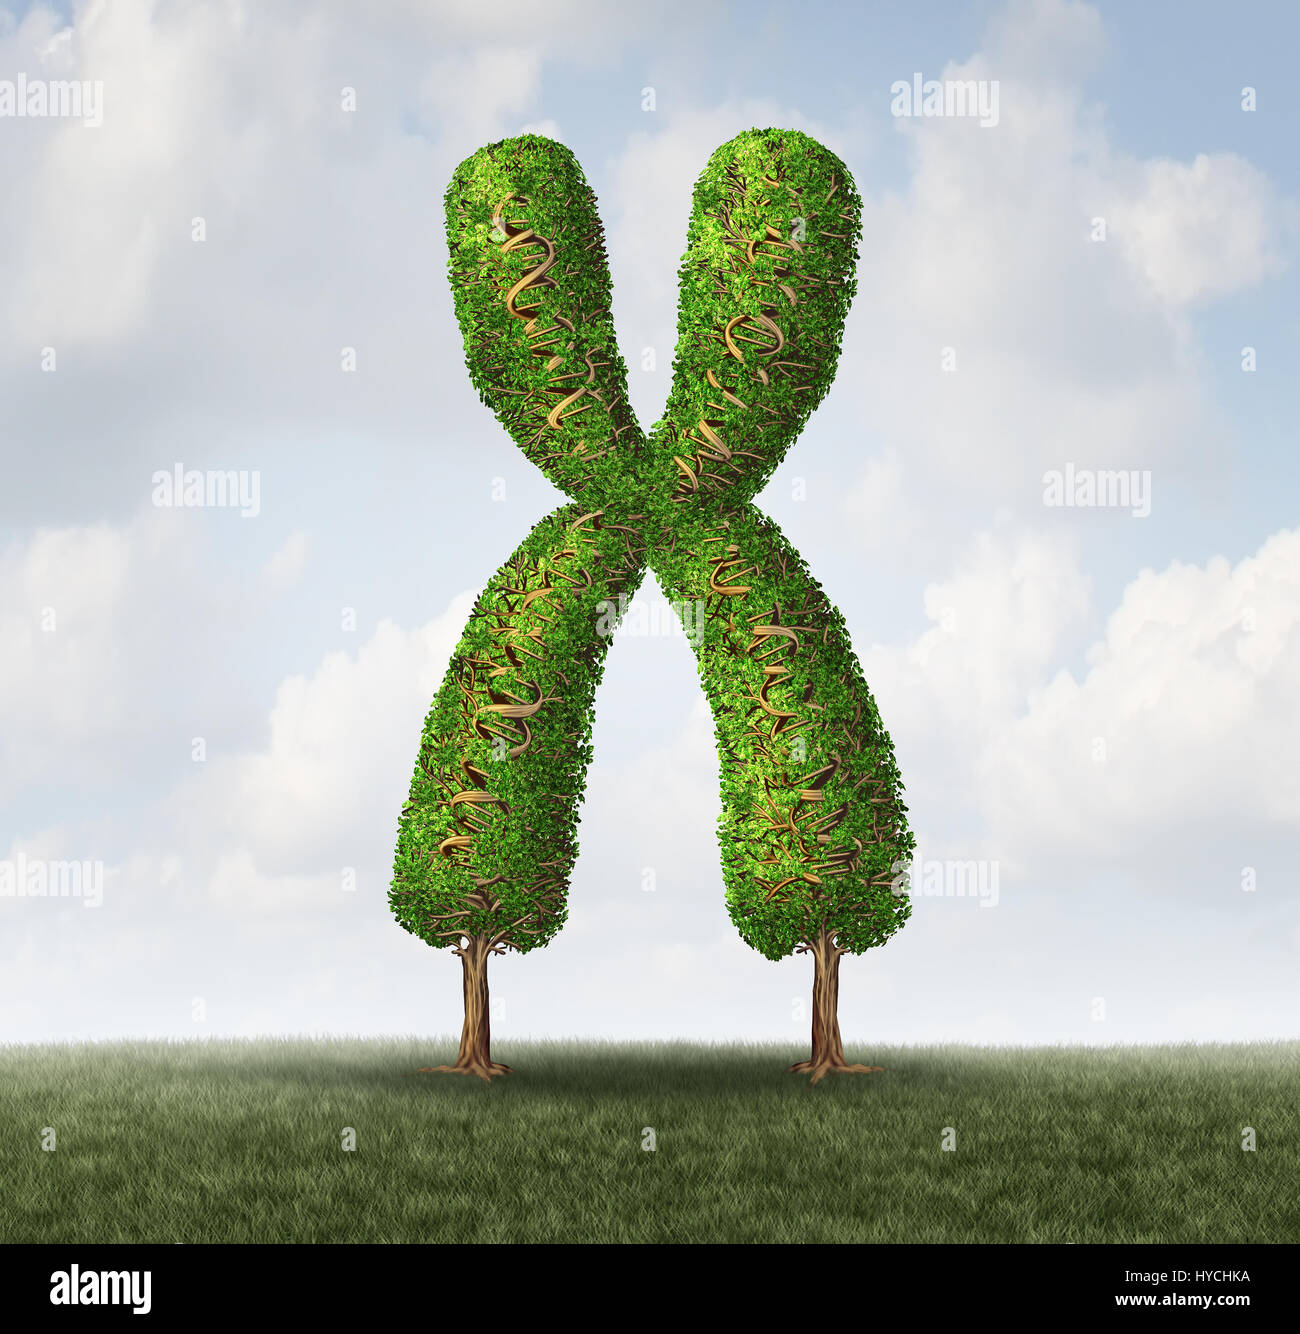 Genetic health concept as a tree shaped as a chromosome with branches shaped as dna double helix strand as a microbiology. Stock Photo